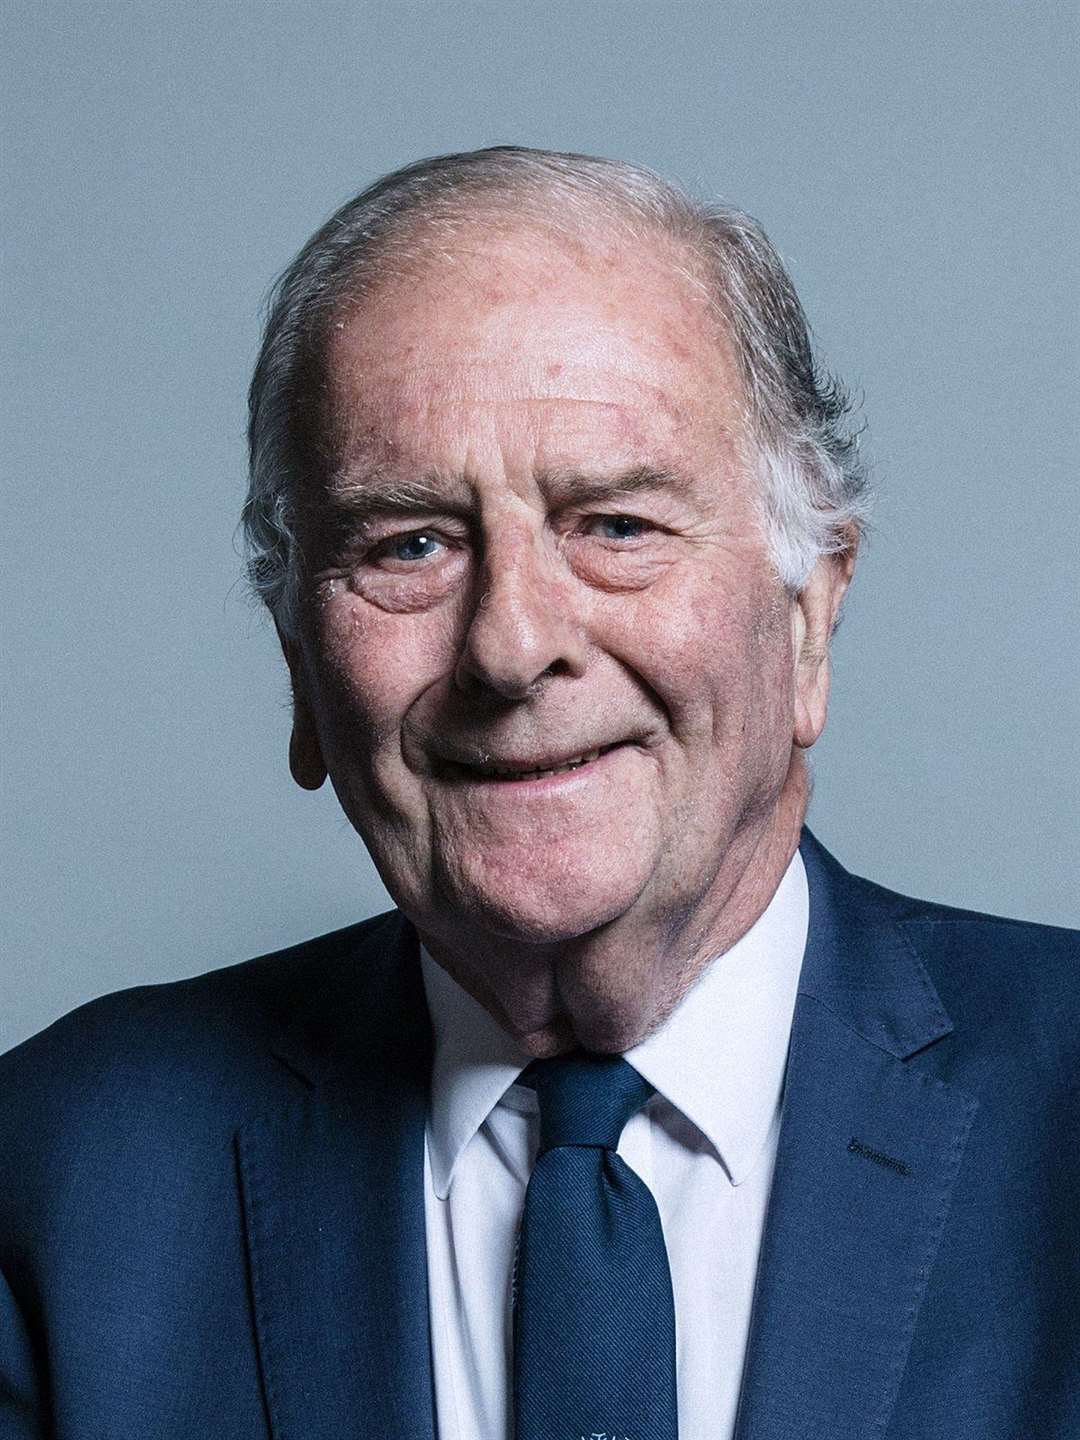 North Thanet MP Sir Roger Gale, took the Home Secretary to task over the pace of the government's plans. Picture: UK Parliament official portraits